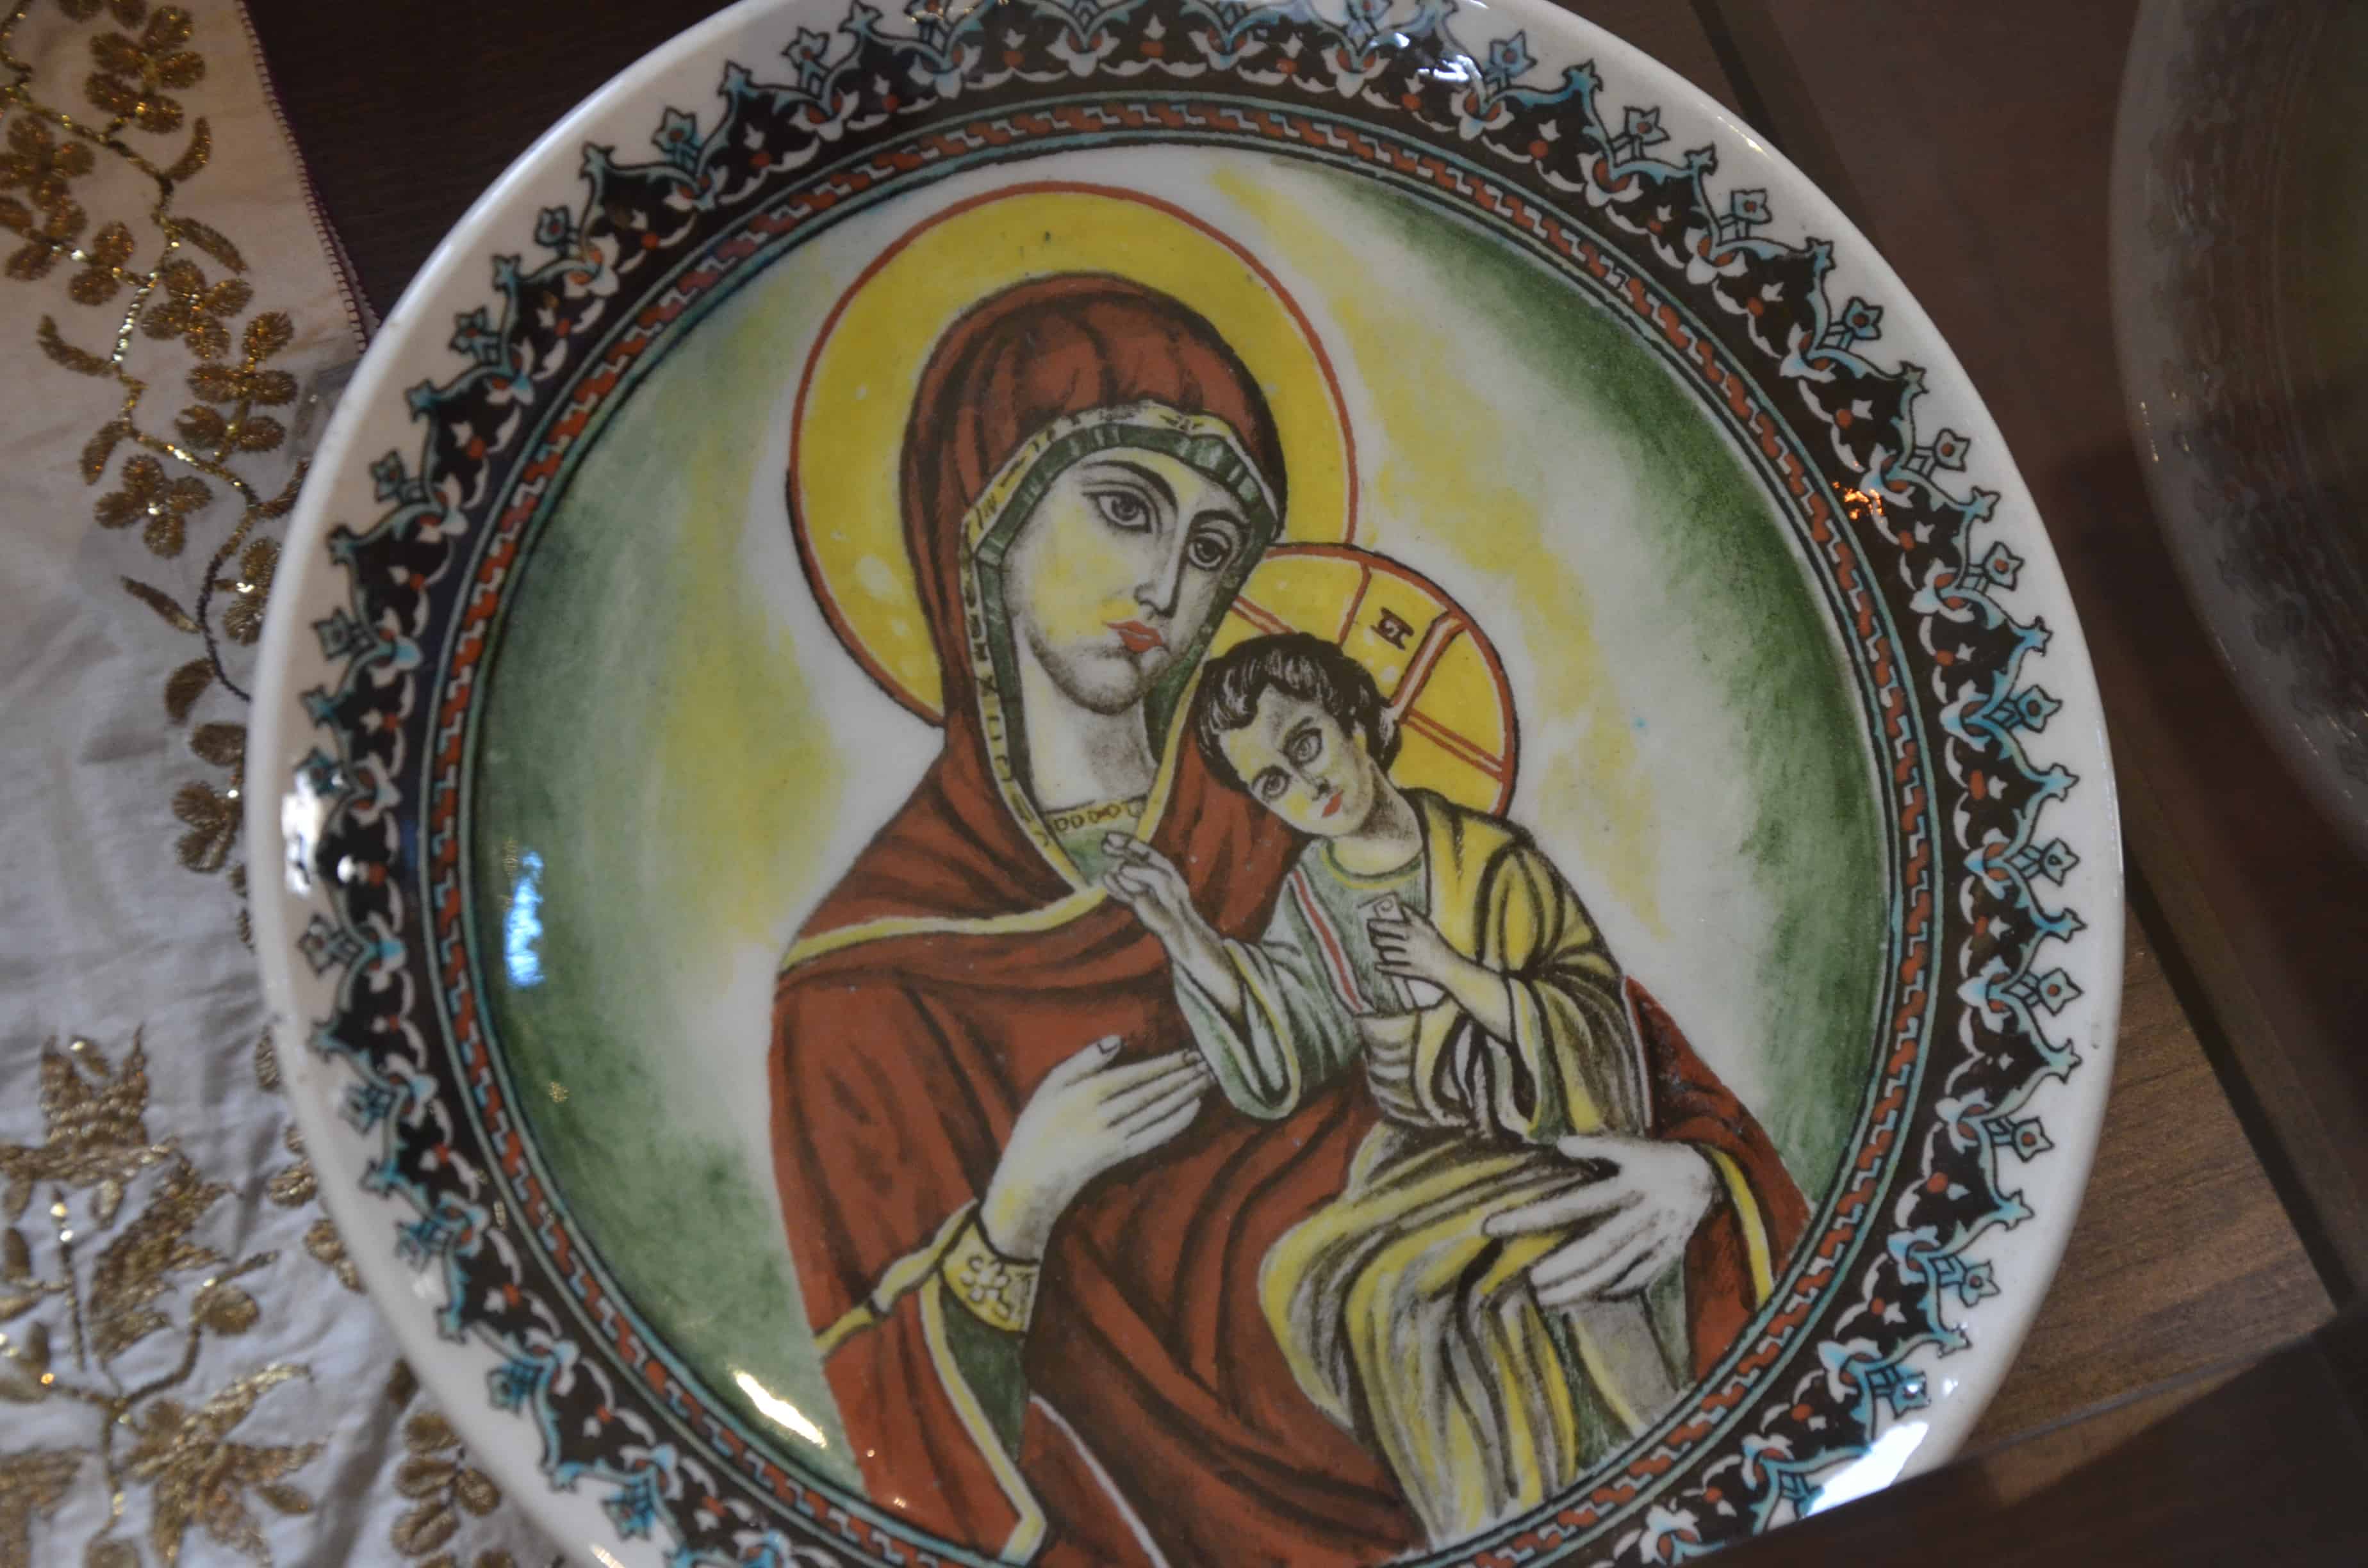 Decorative plate of the Virgin and Child